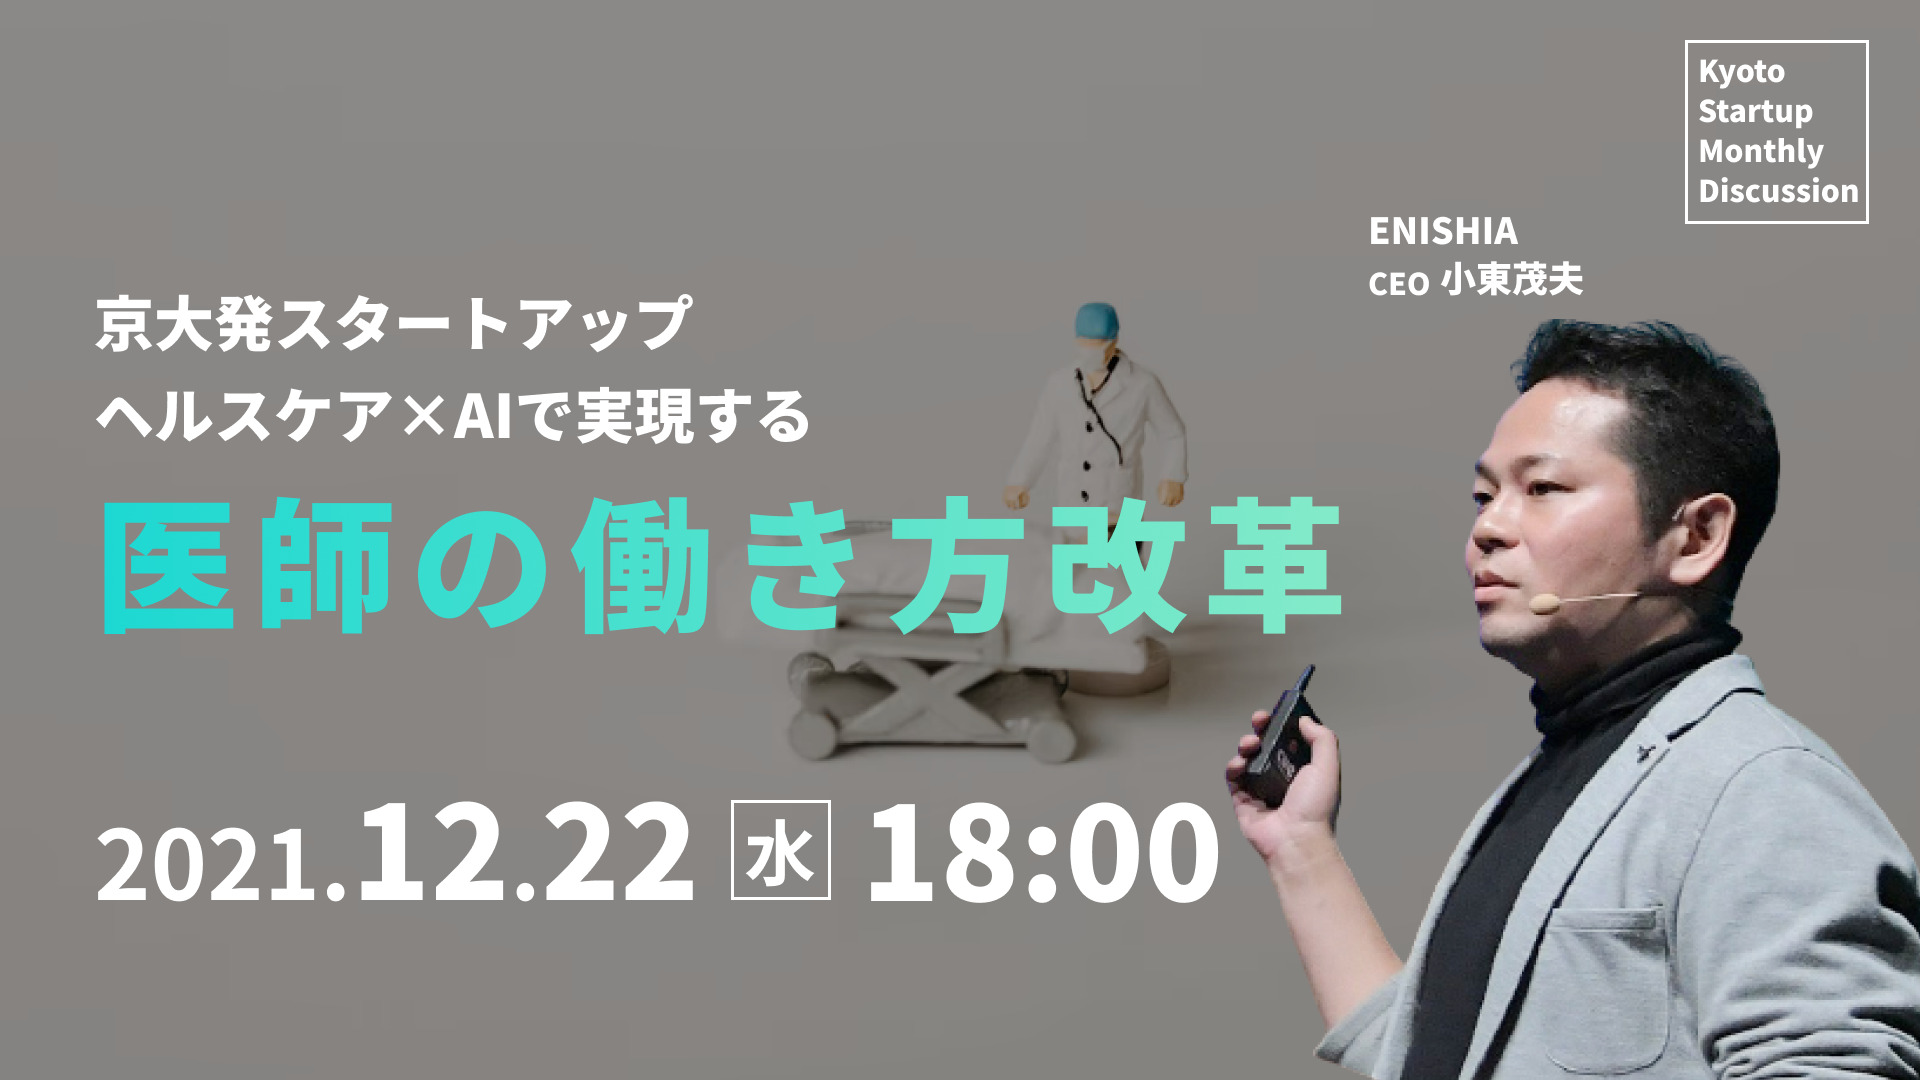 Kyoto Startup Monthly Discussion #07